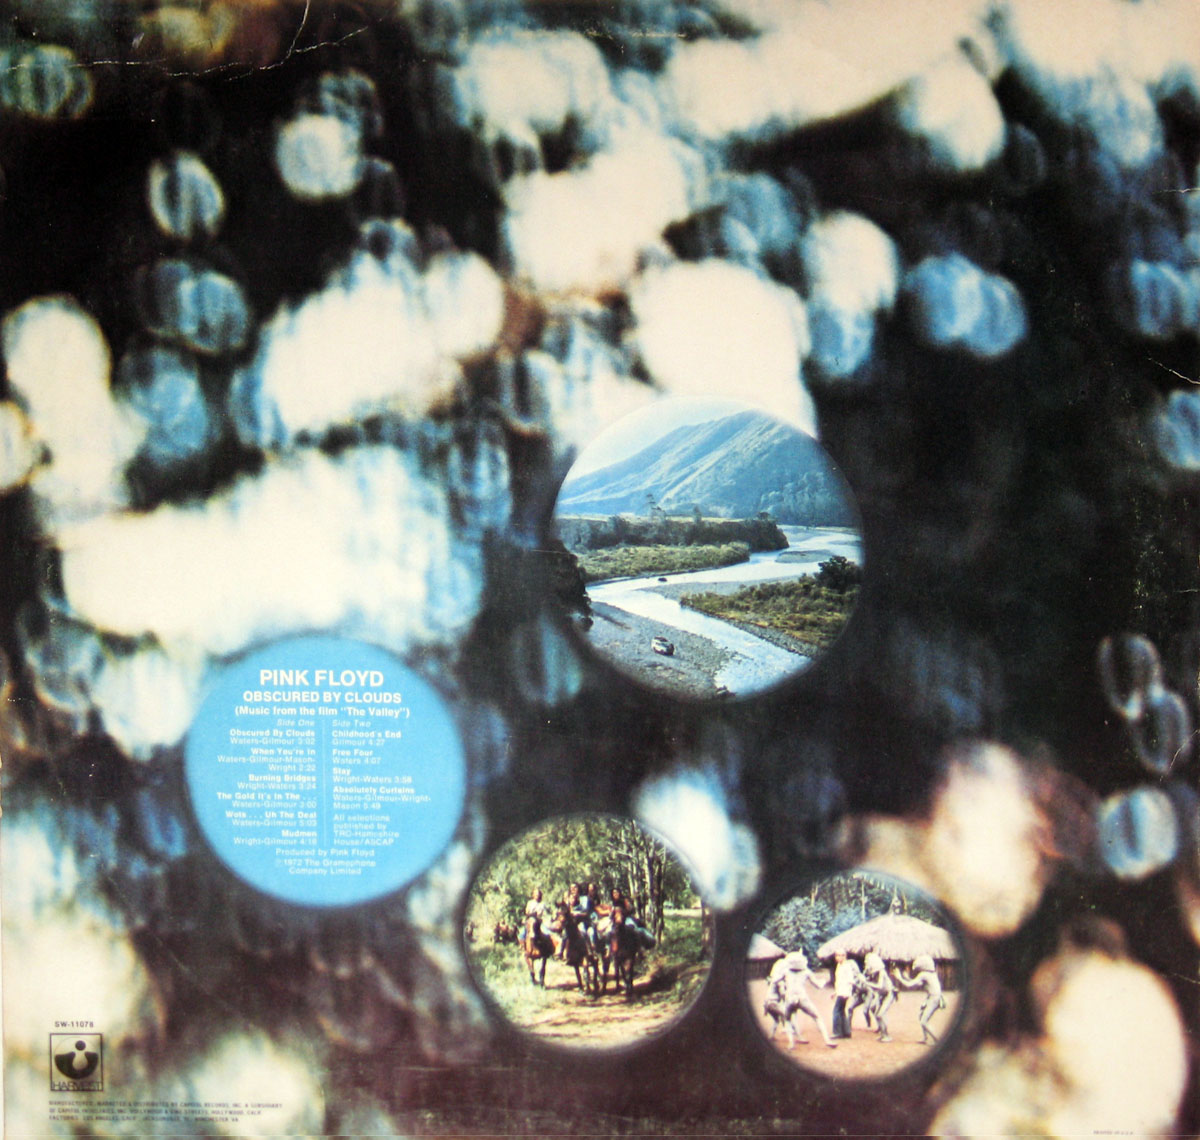 High Resolution Photo #2 PINK FLOYD Obscured Clouds USA 